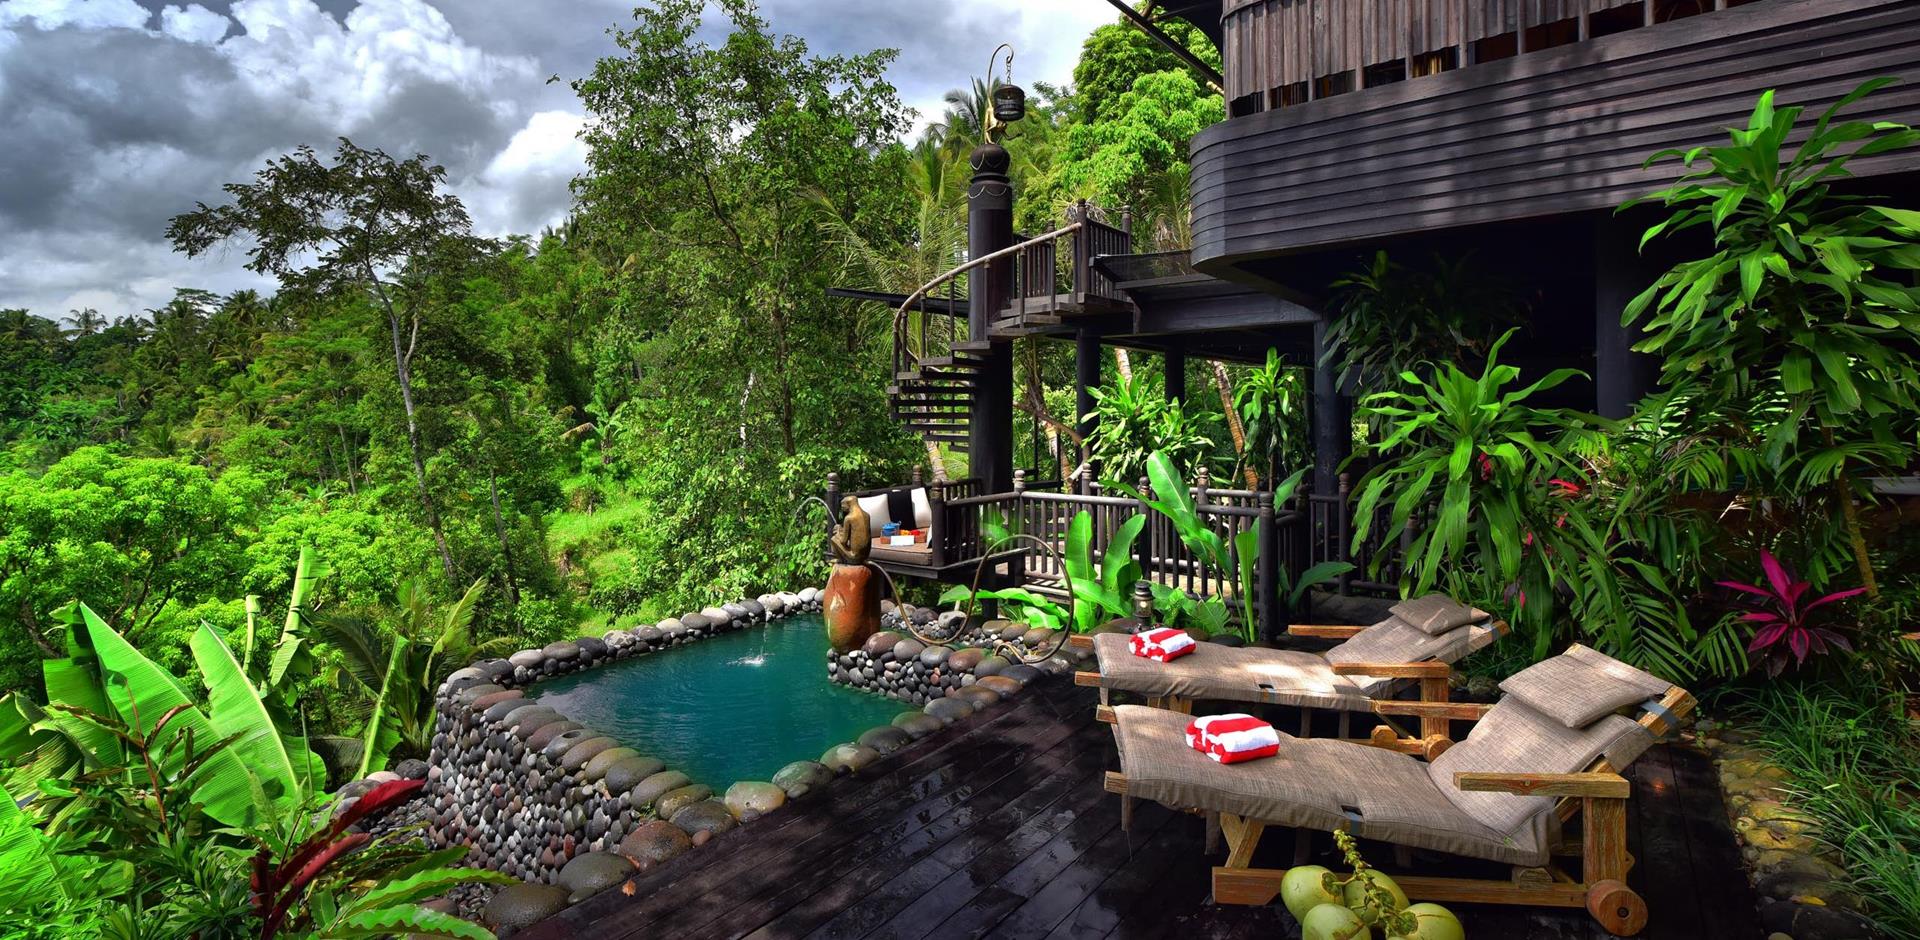 Accommodation. Indonesia, A&K